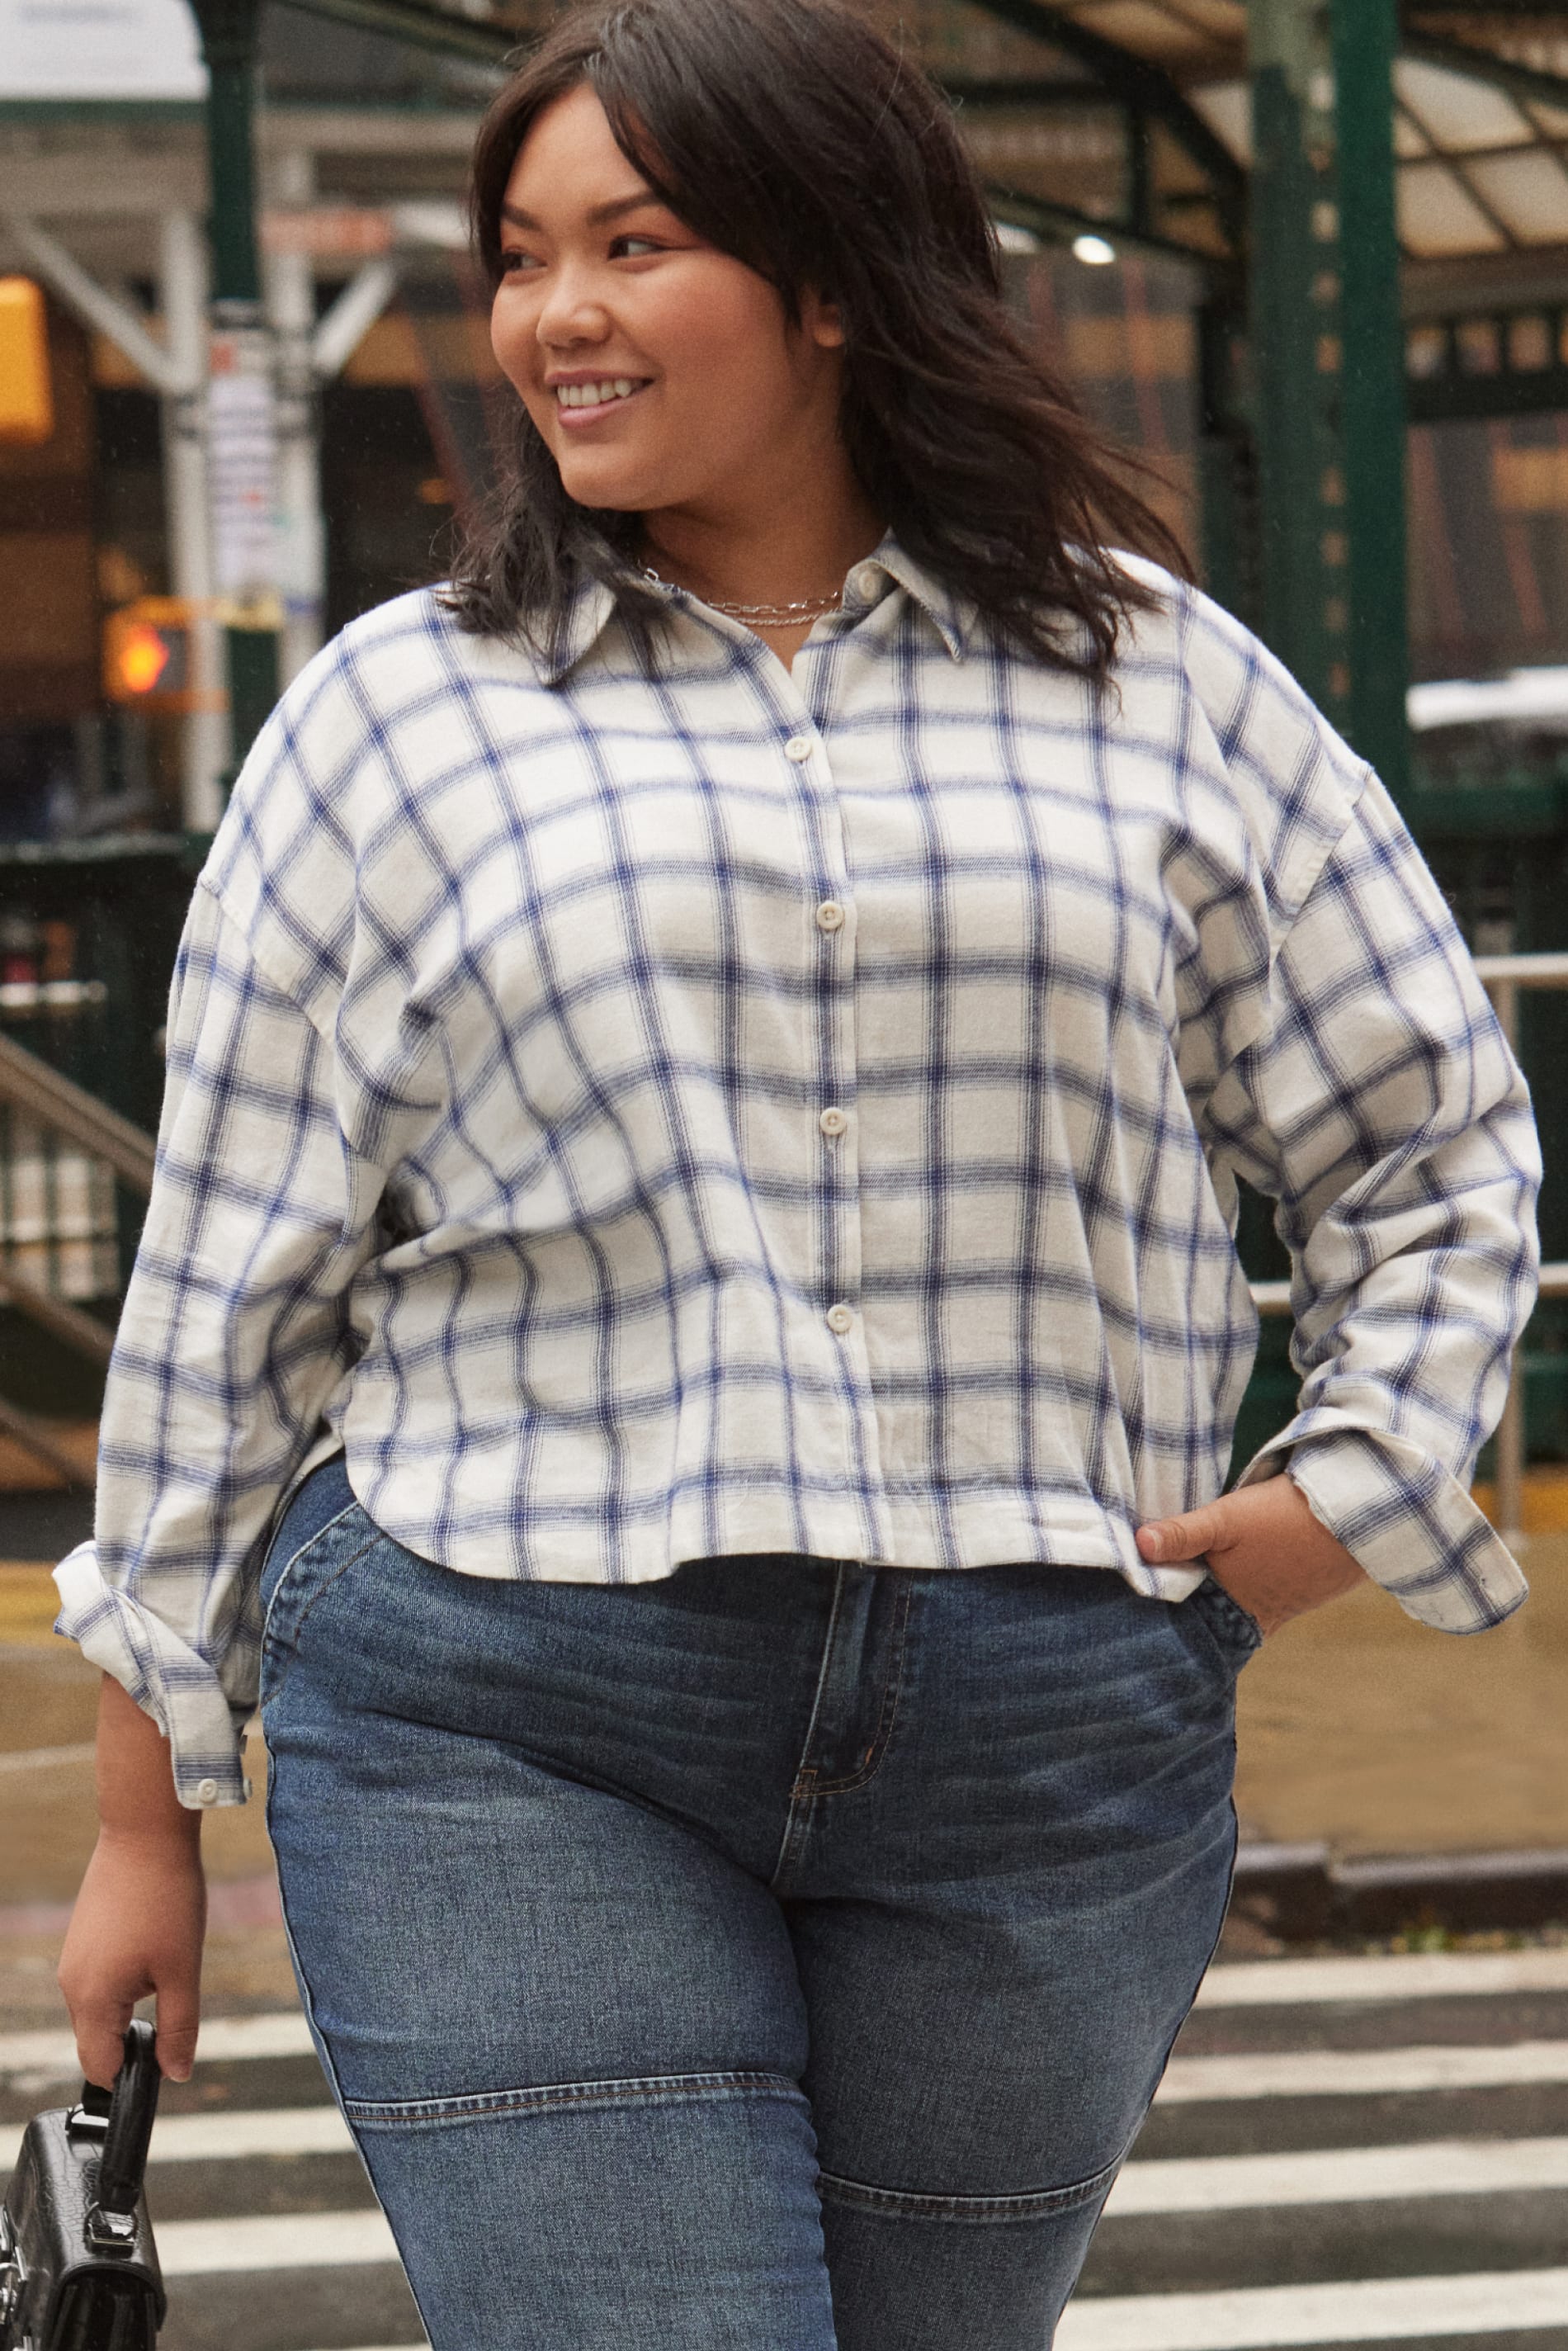 Plus model wearing Stitch Fix women’s clothing including trending denim and a button-down shirt.